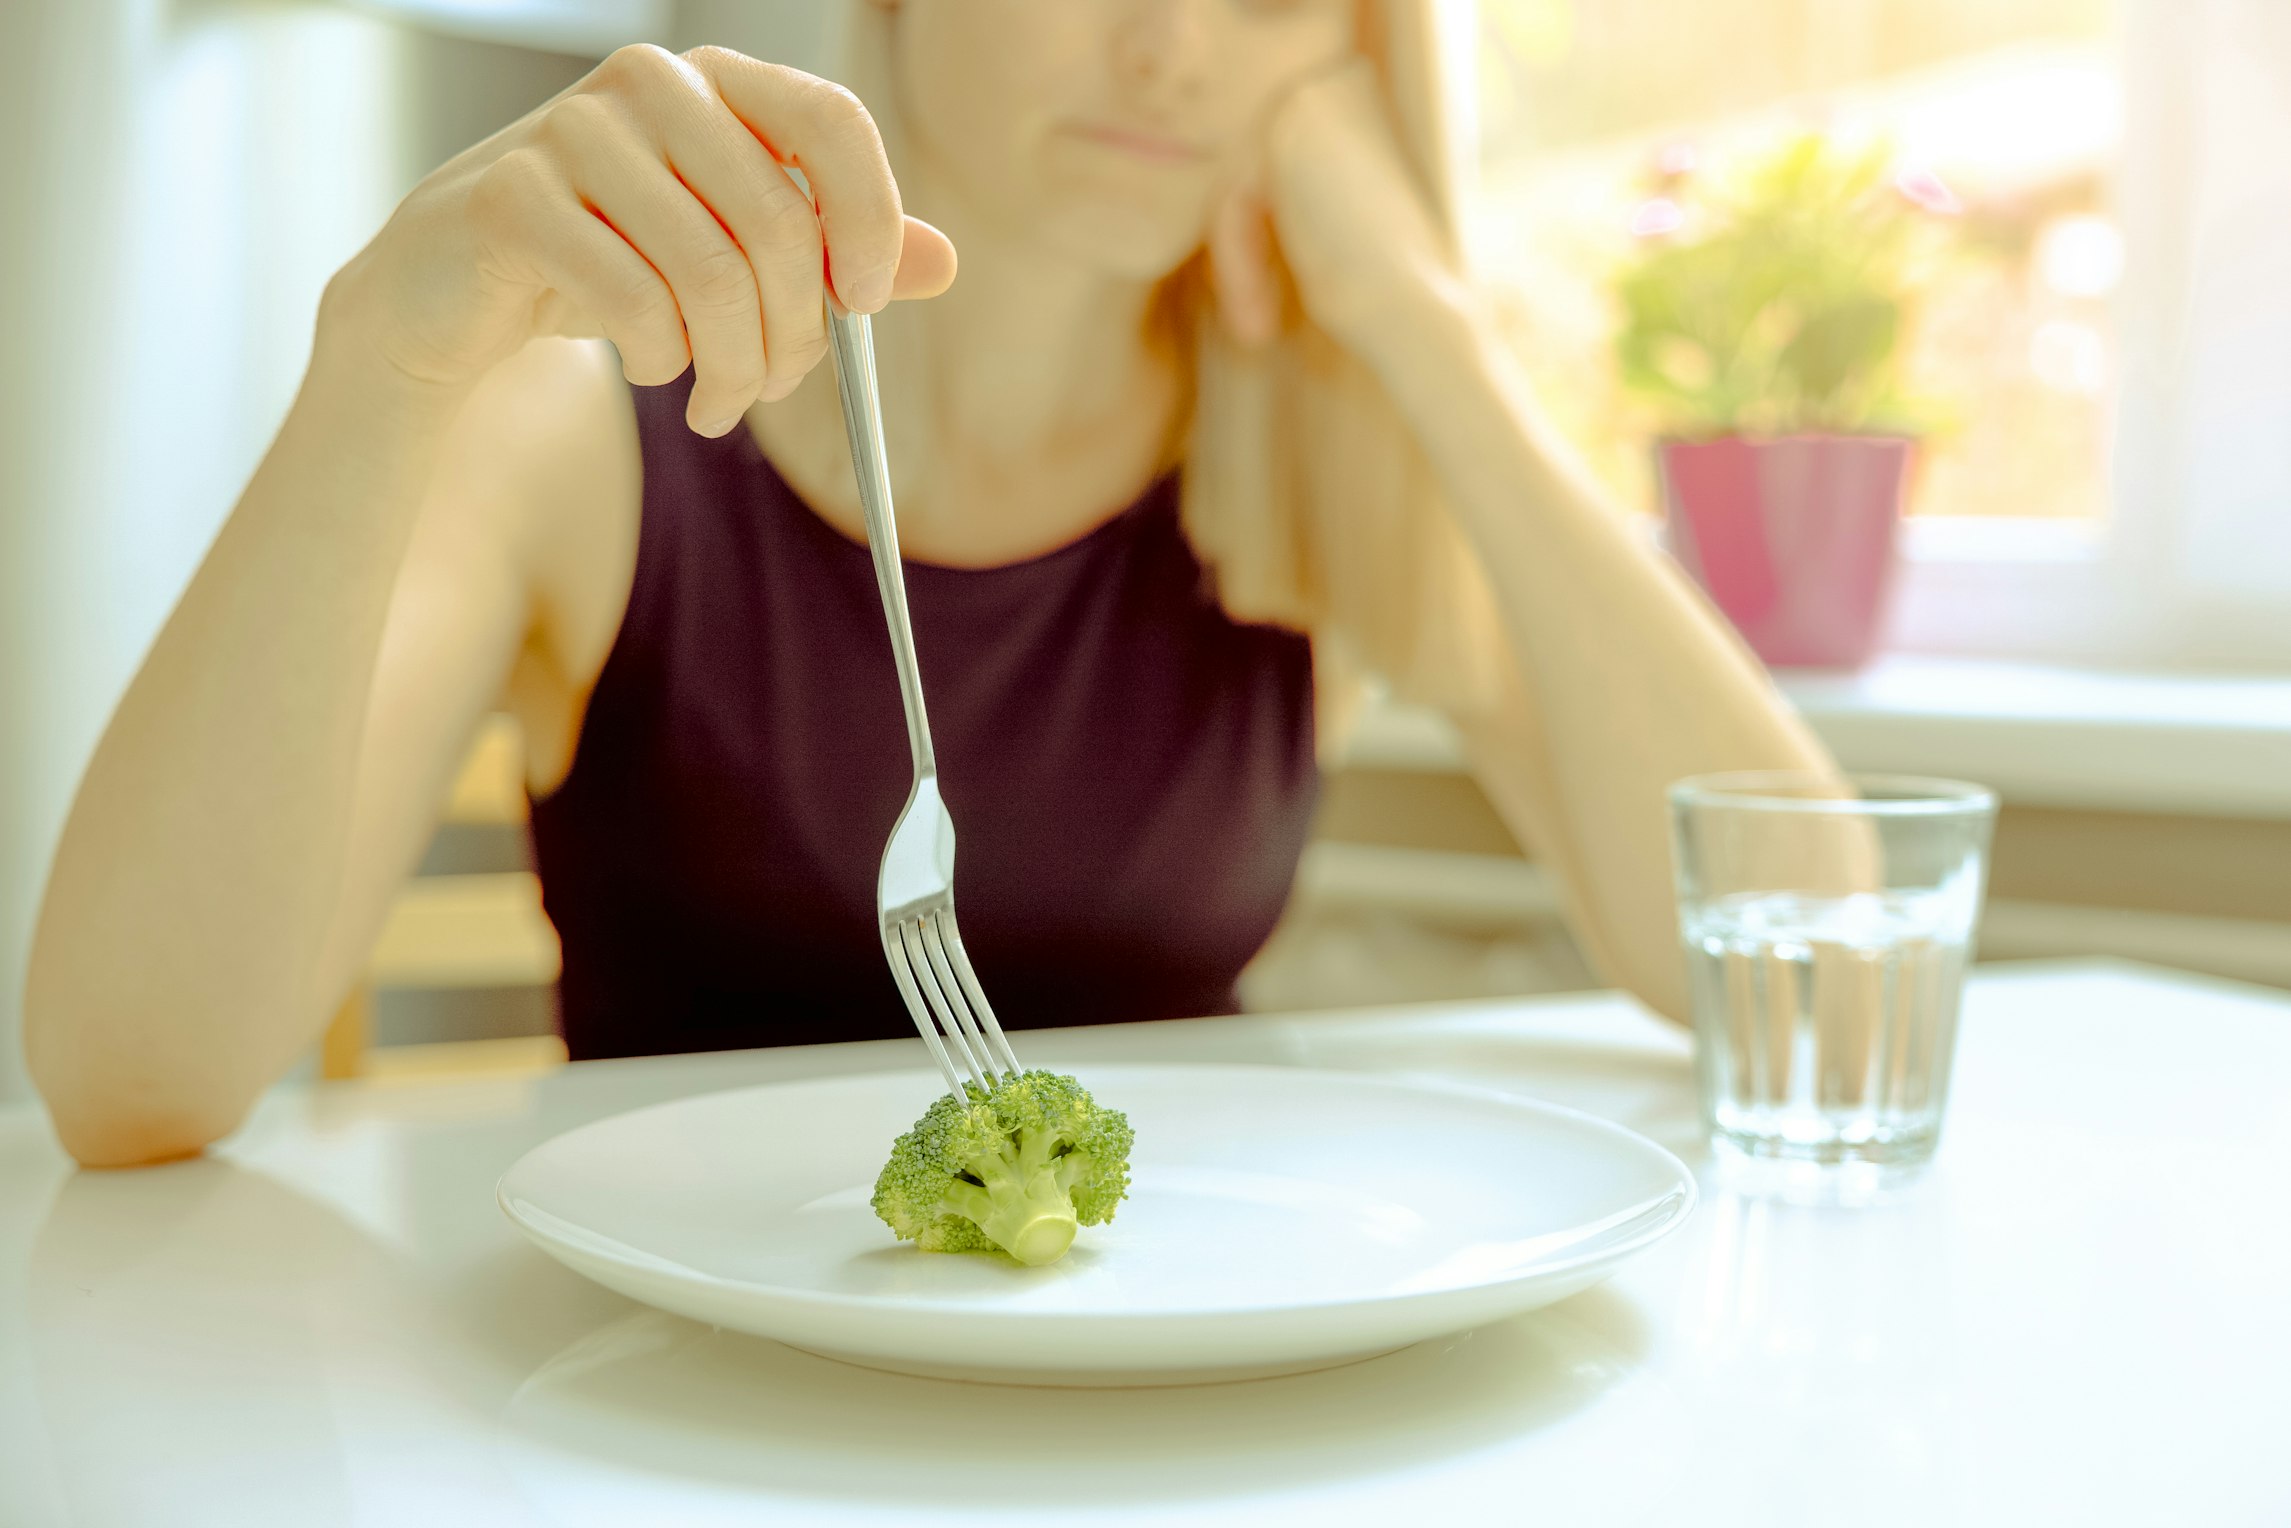 The potential medical cannabis holds for eating disorder treatment